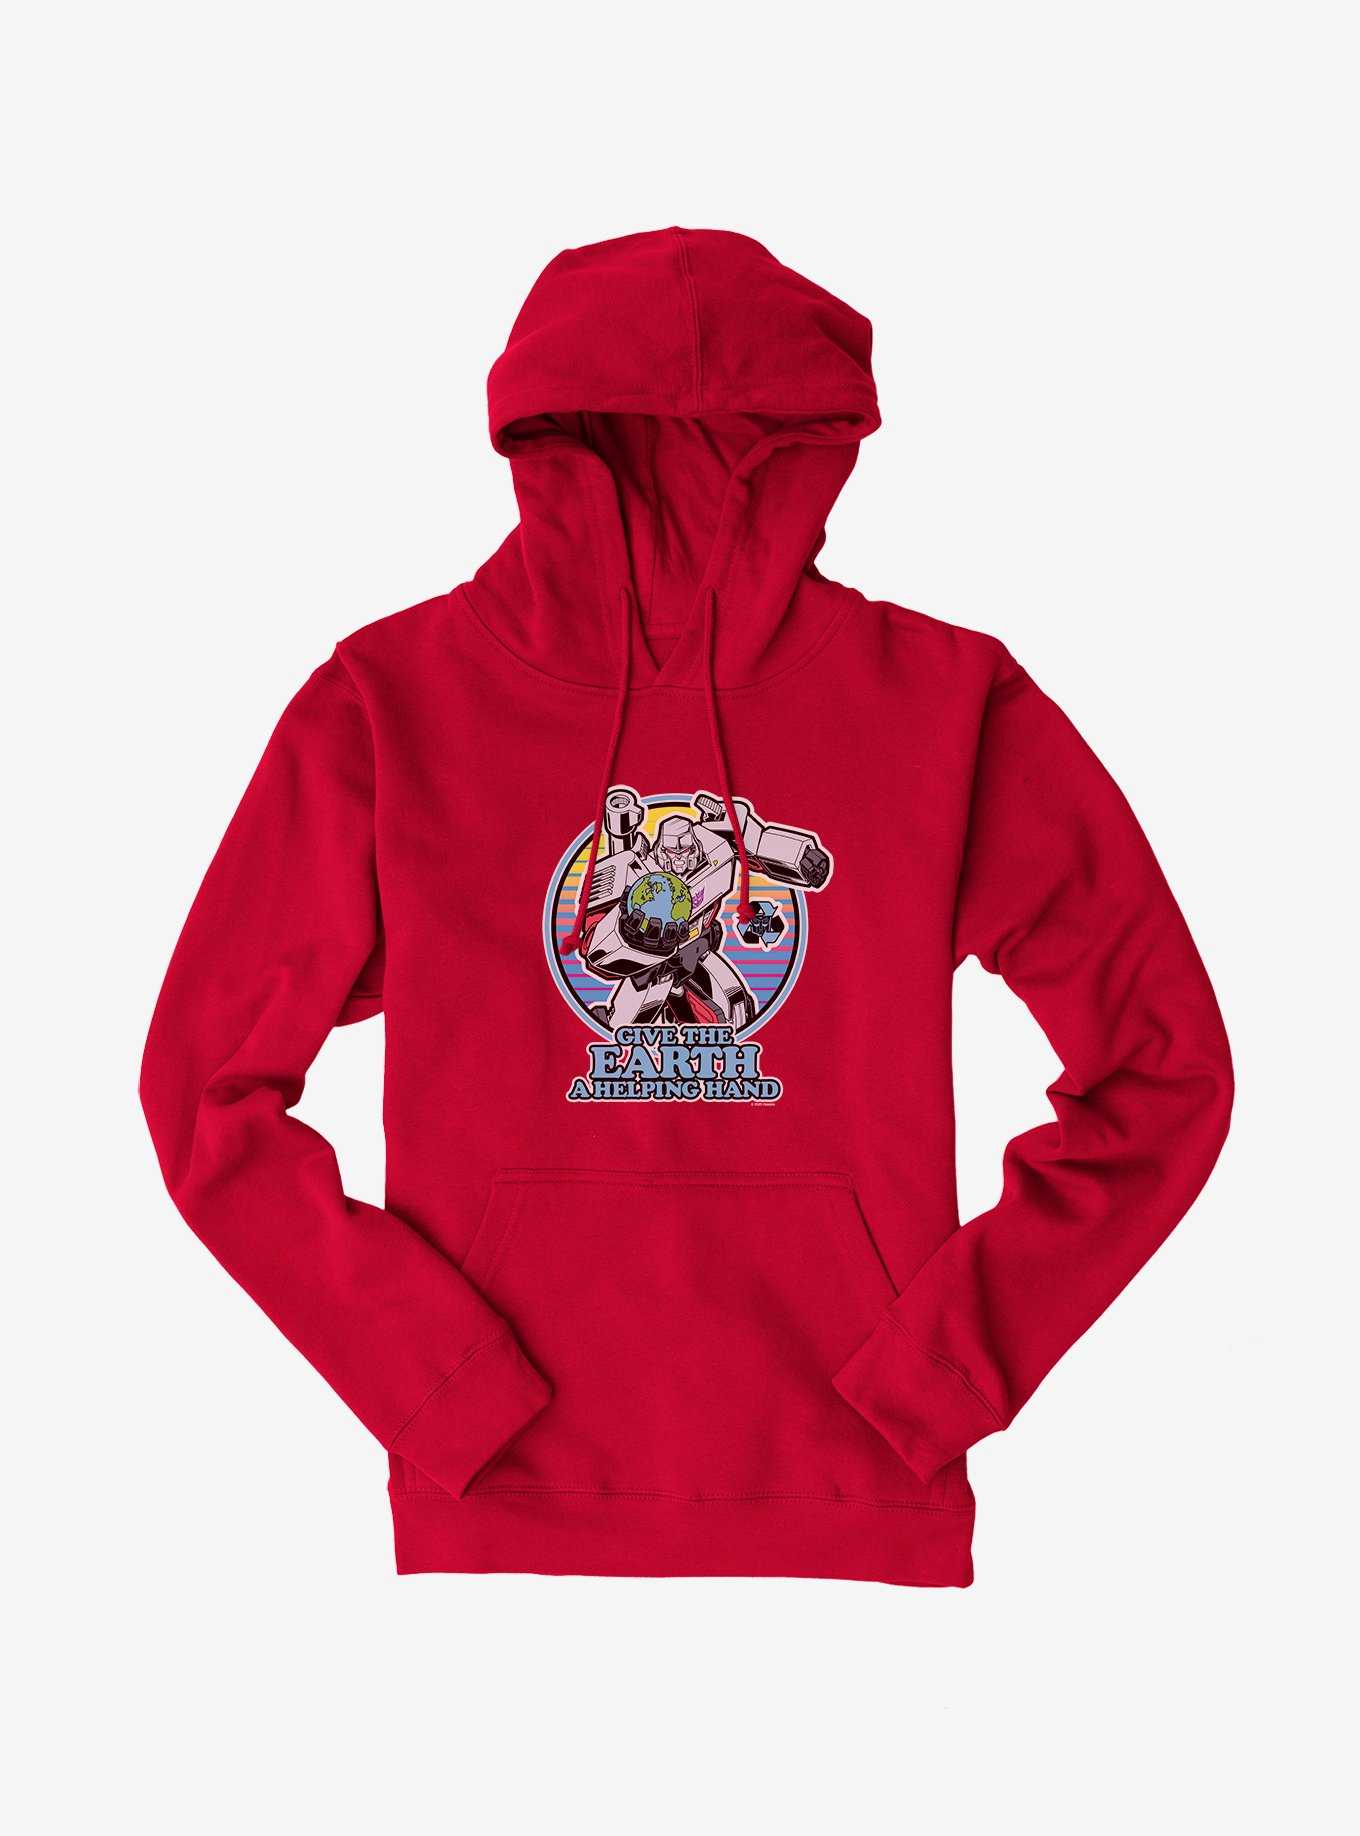 Transformers A Helping Hand Hoodie, , hi-res